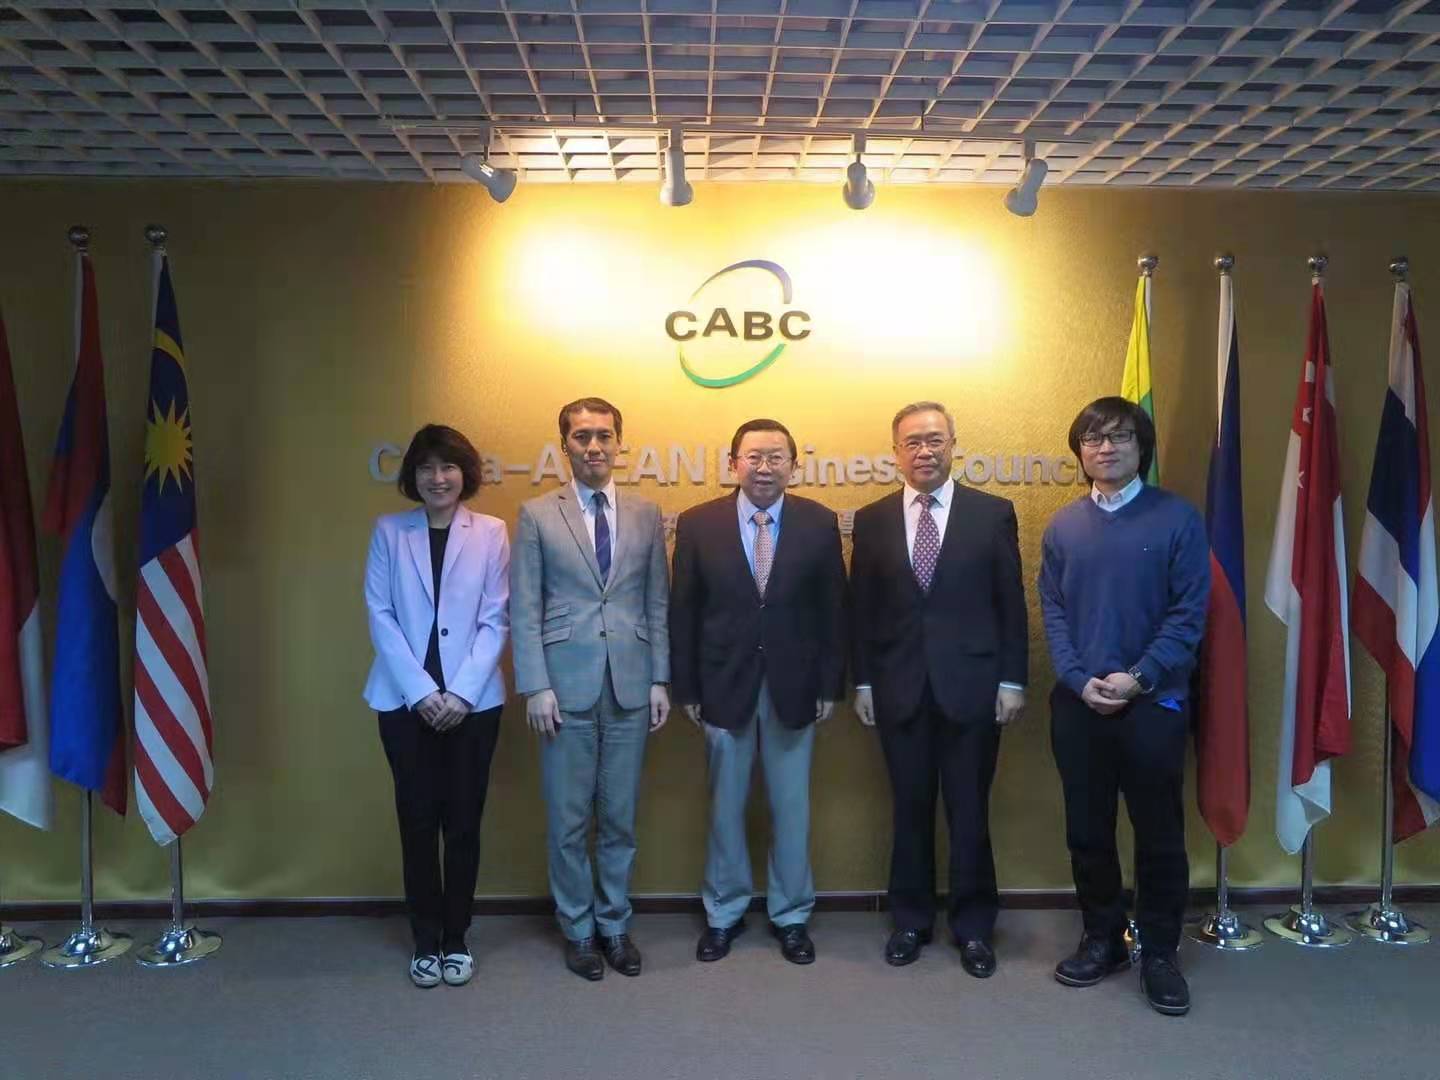 Mr.Xu met with Mr. Shigekazu Fukunaga, Commercial Counselor of the Japanese Embassy in China